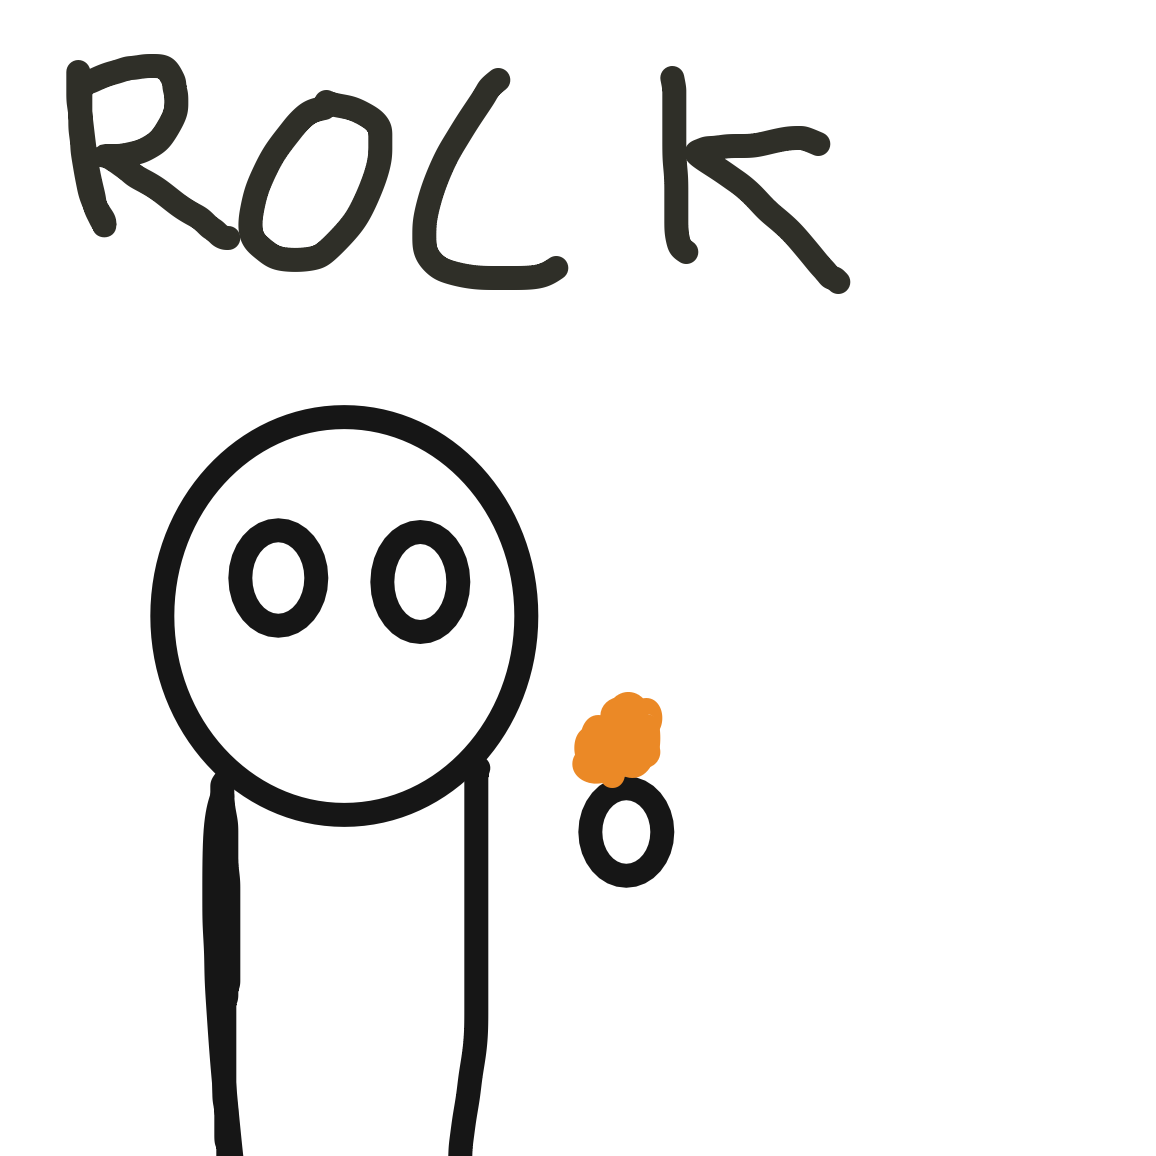 Rock/earth - Online Drawing Game Comic Strip Panel by Jack